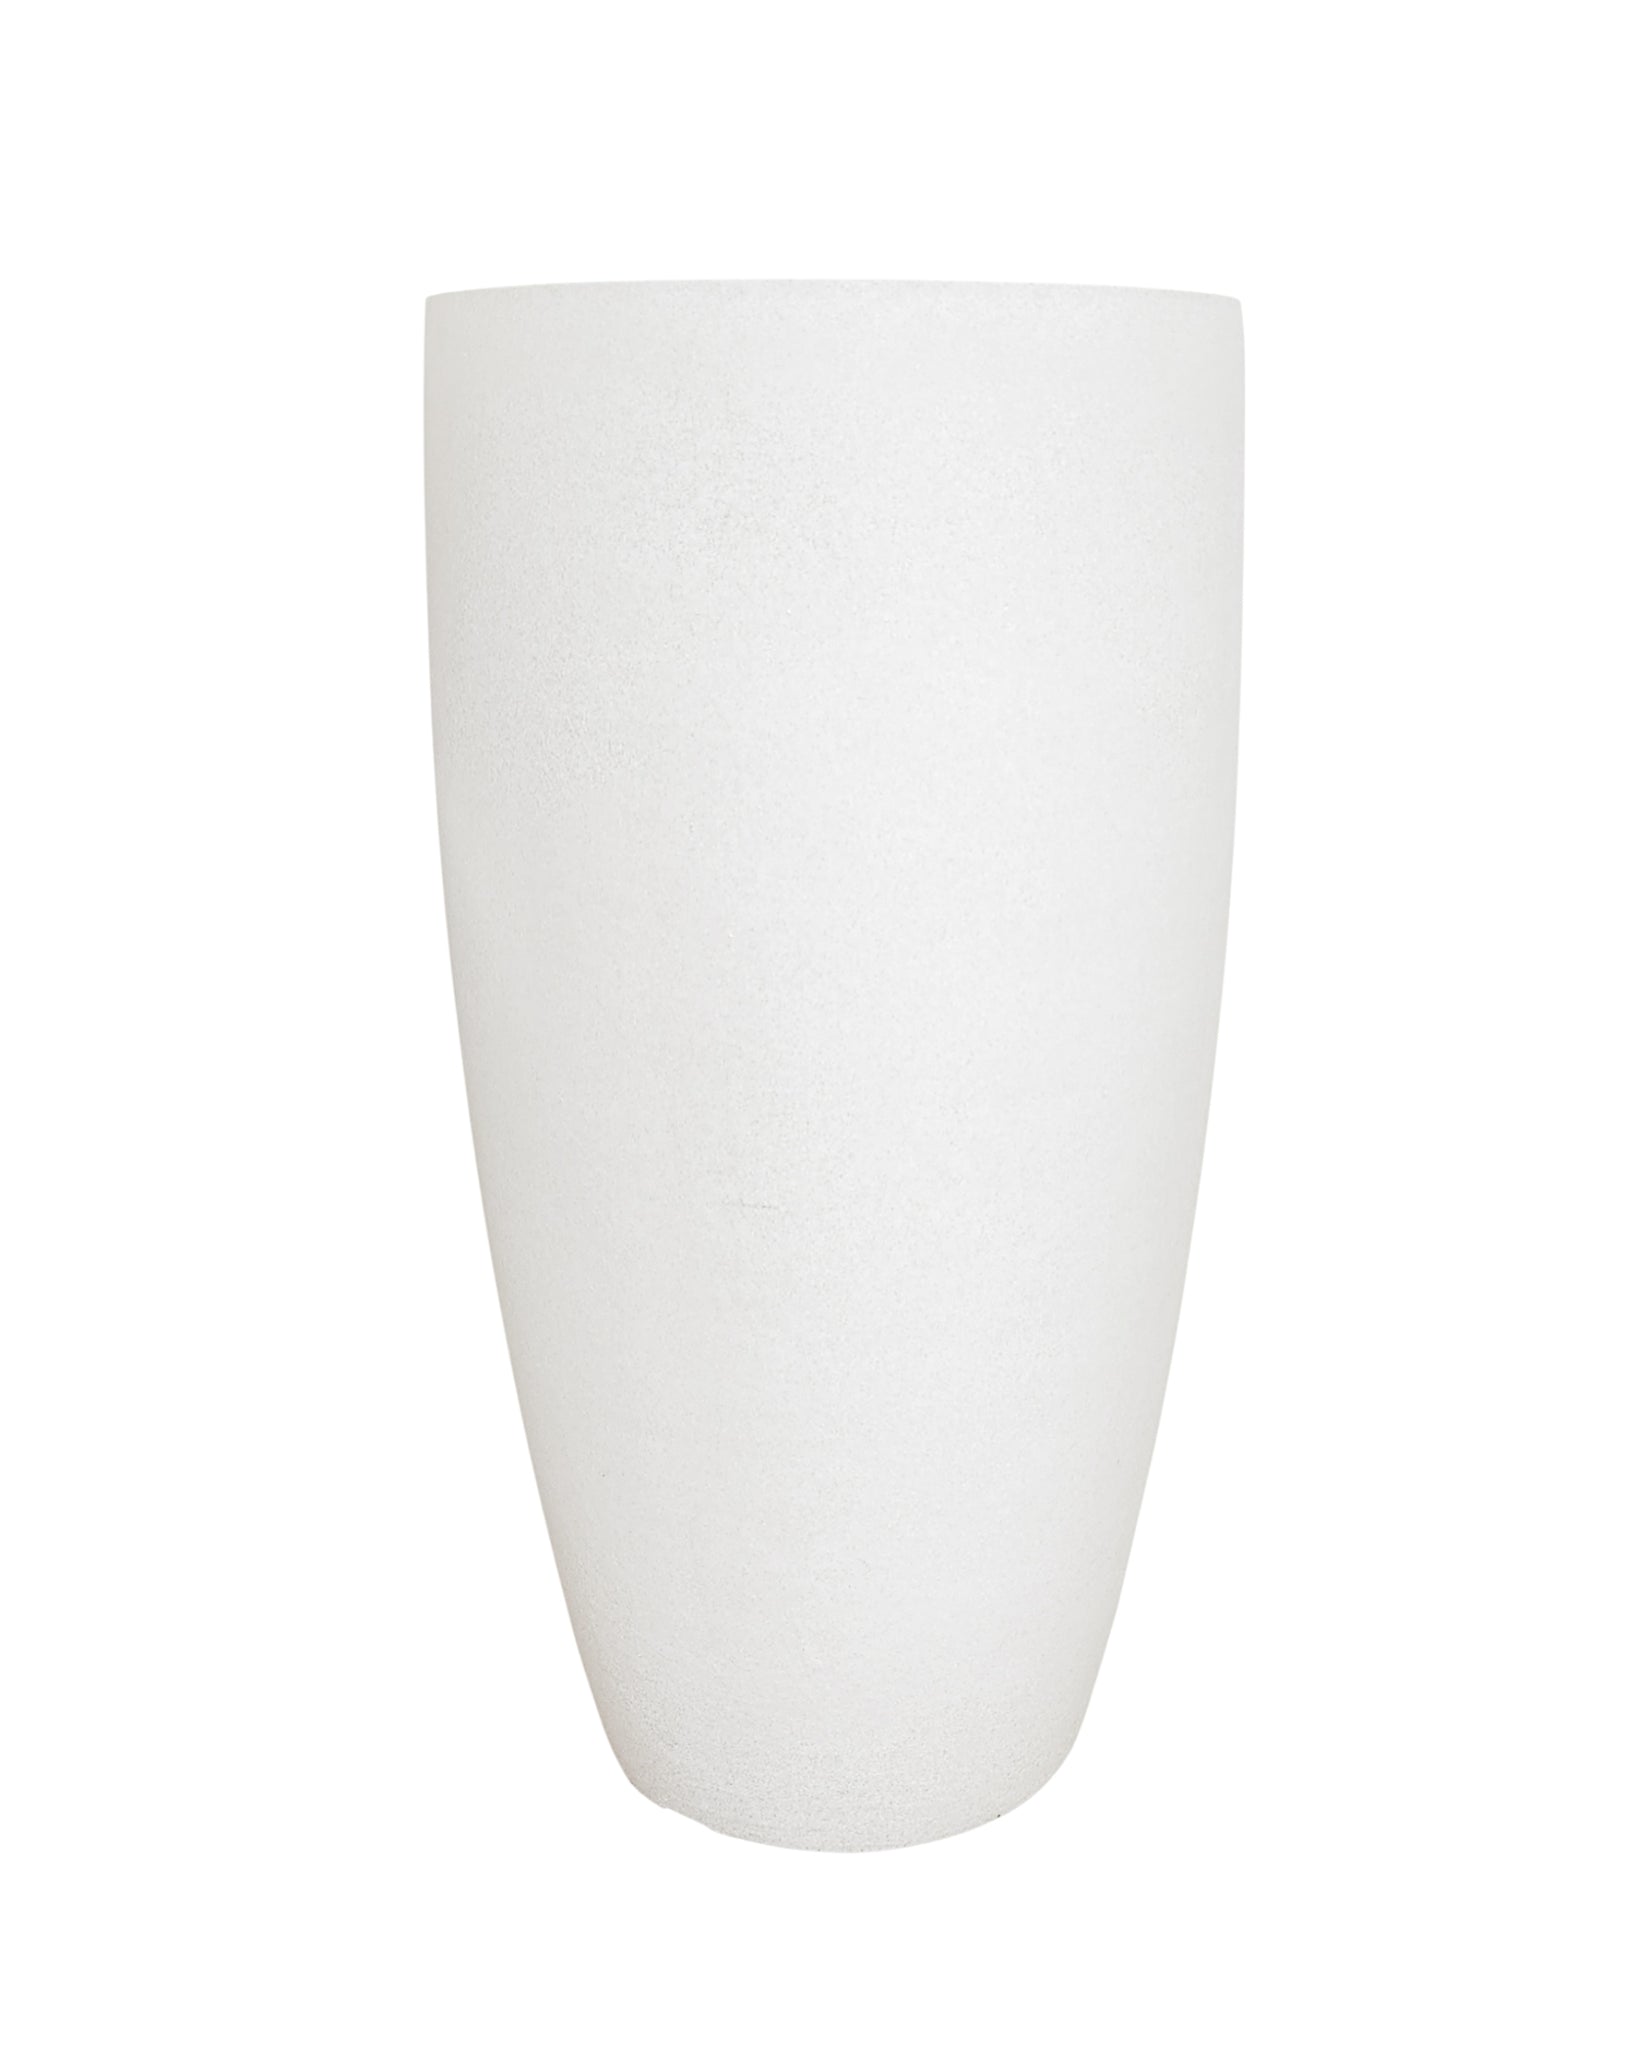 Traditional Conic Slim Japi Planter, a slimline modern statement planter  that adds extra height and décor interest, bringing style into your architectural space. Smooth finish. Florastyle by HIngham. Colour off white.